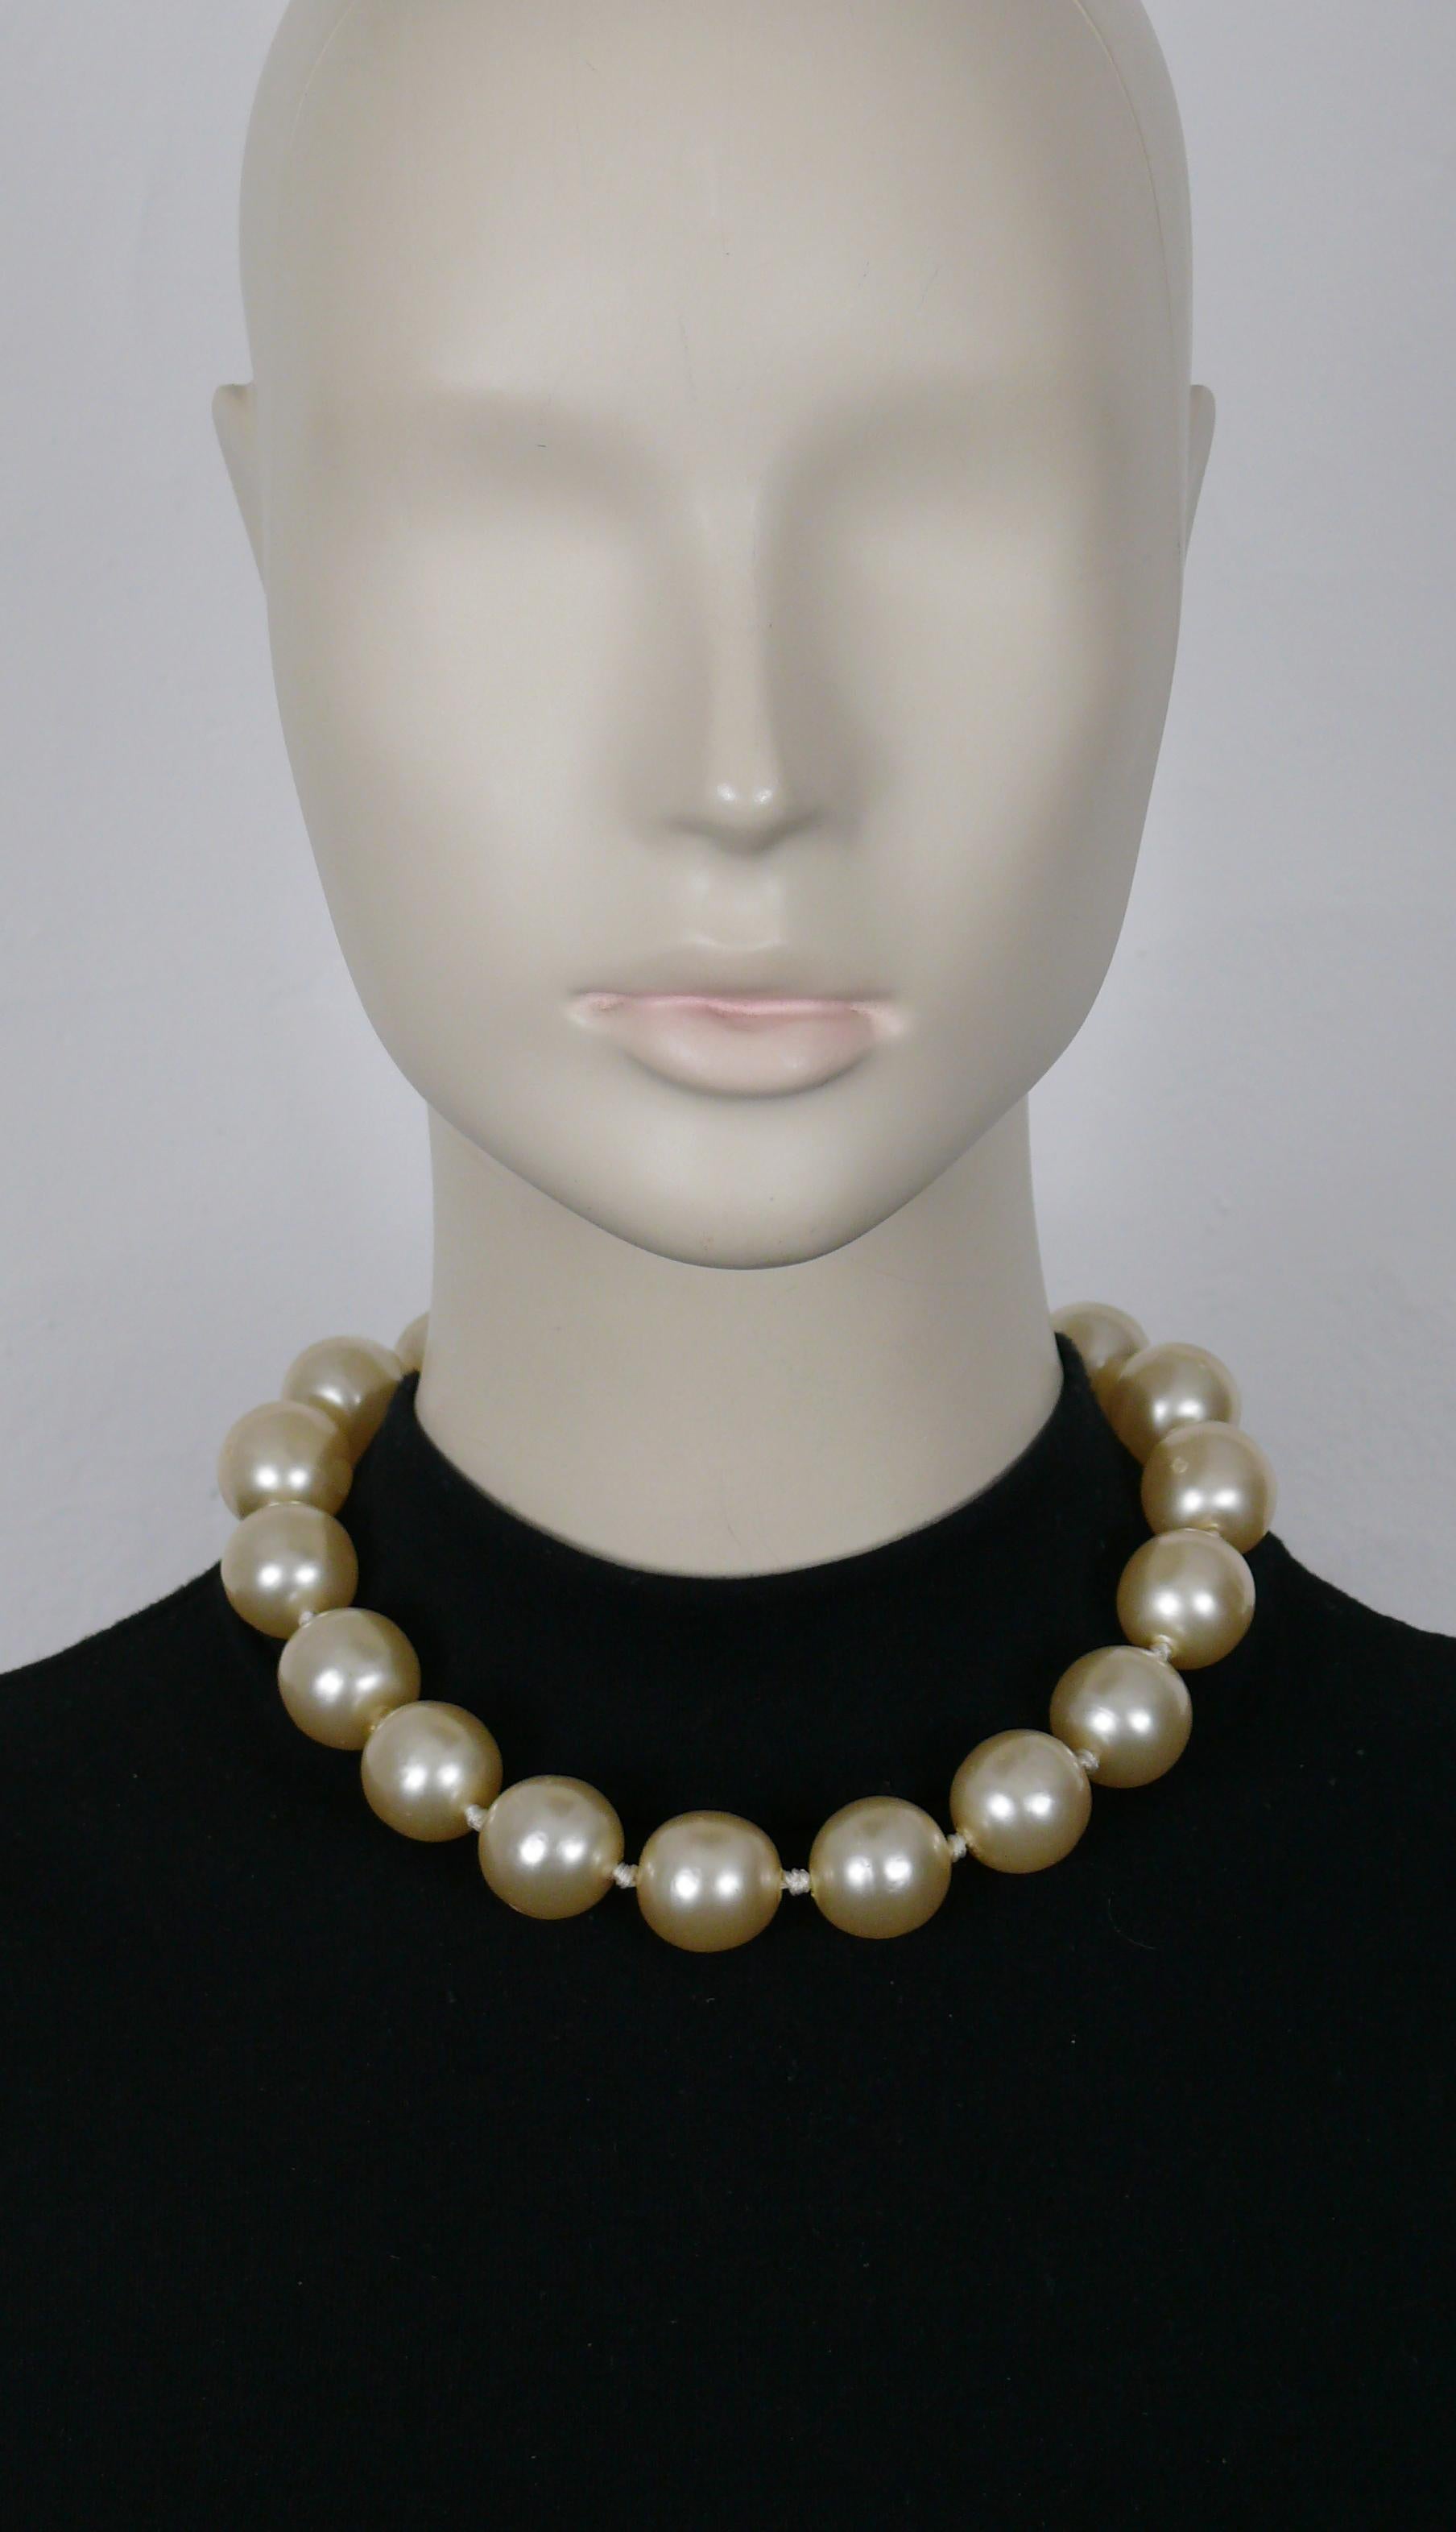 CHANEL by KARL LAGERFELD vintage large off-white faux pearl necklace.

From the collection N°28 (year : 1993).

Adjustable hook clasp closure.

Embossed CHANEL 2 8 Made in France.

Indicative measurements : adjustable length from approx. 43 cm